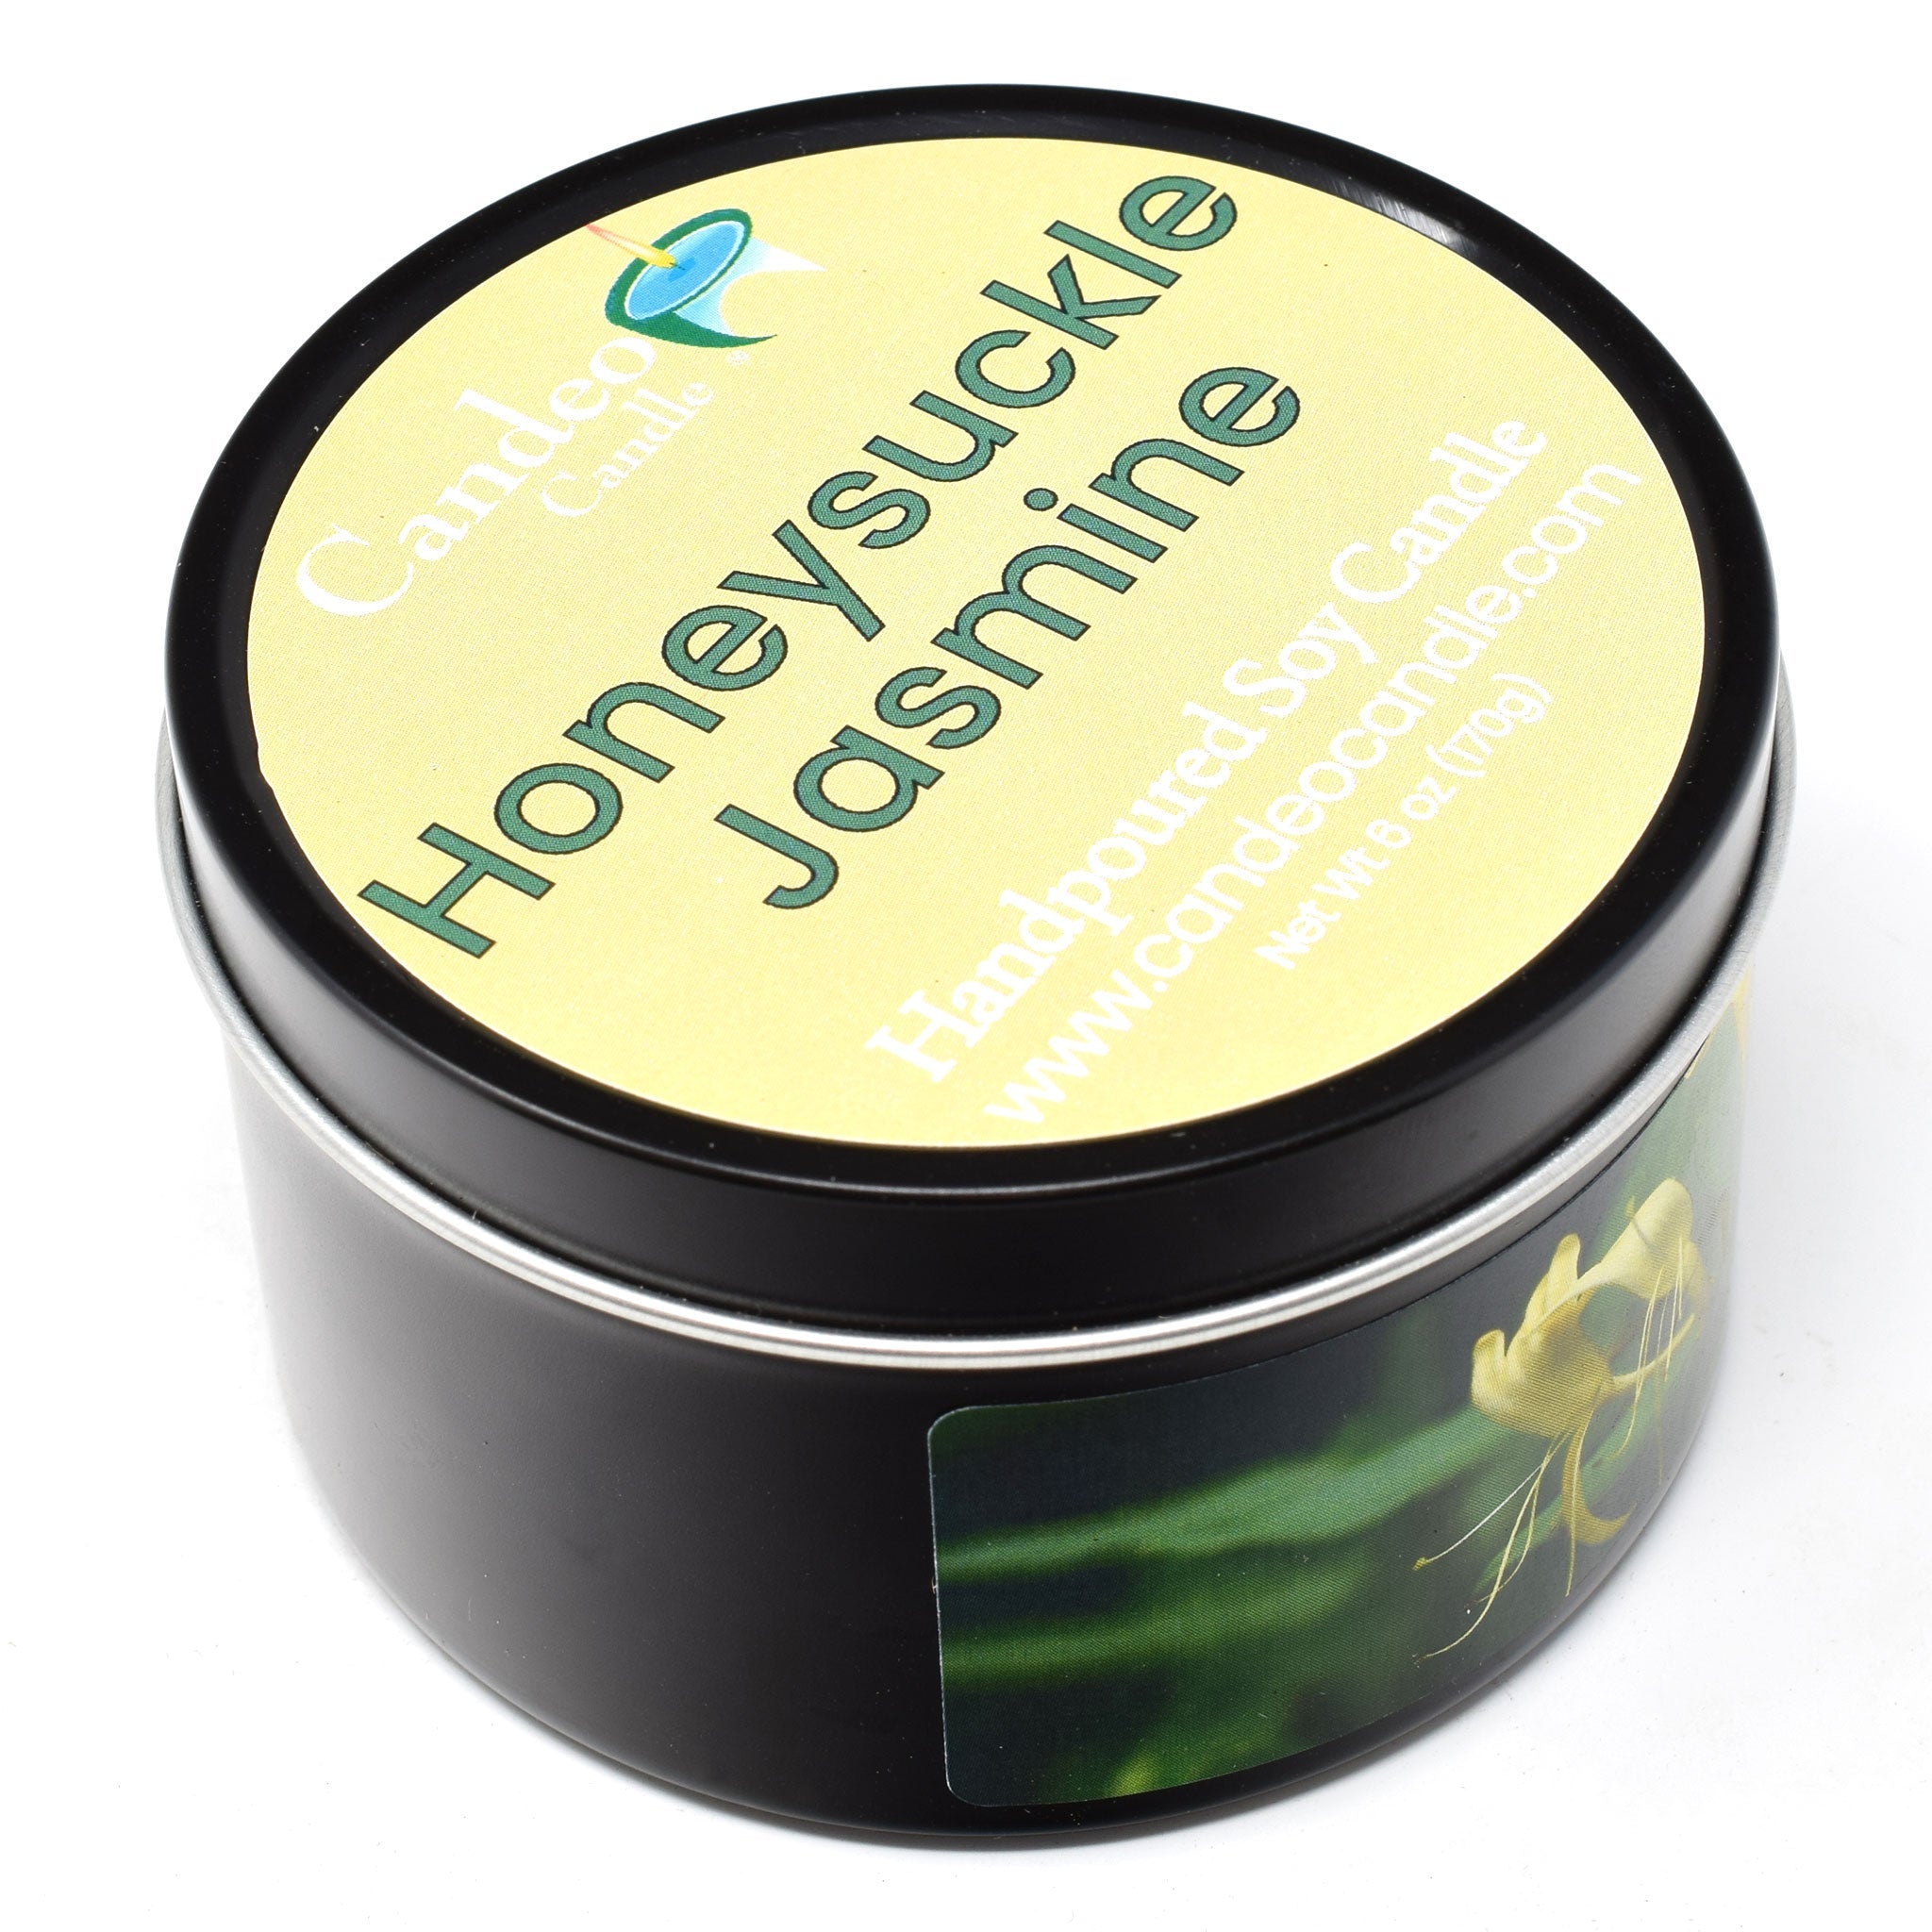 Honeysuckle Jasmine, 6oz Soy Candle Tin - Candeo Candle